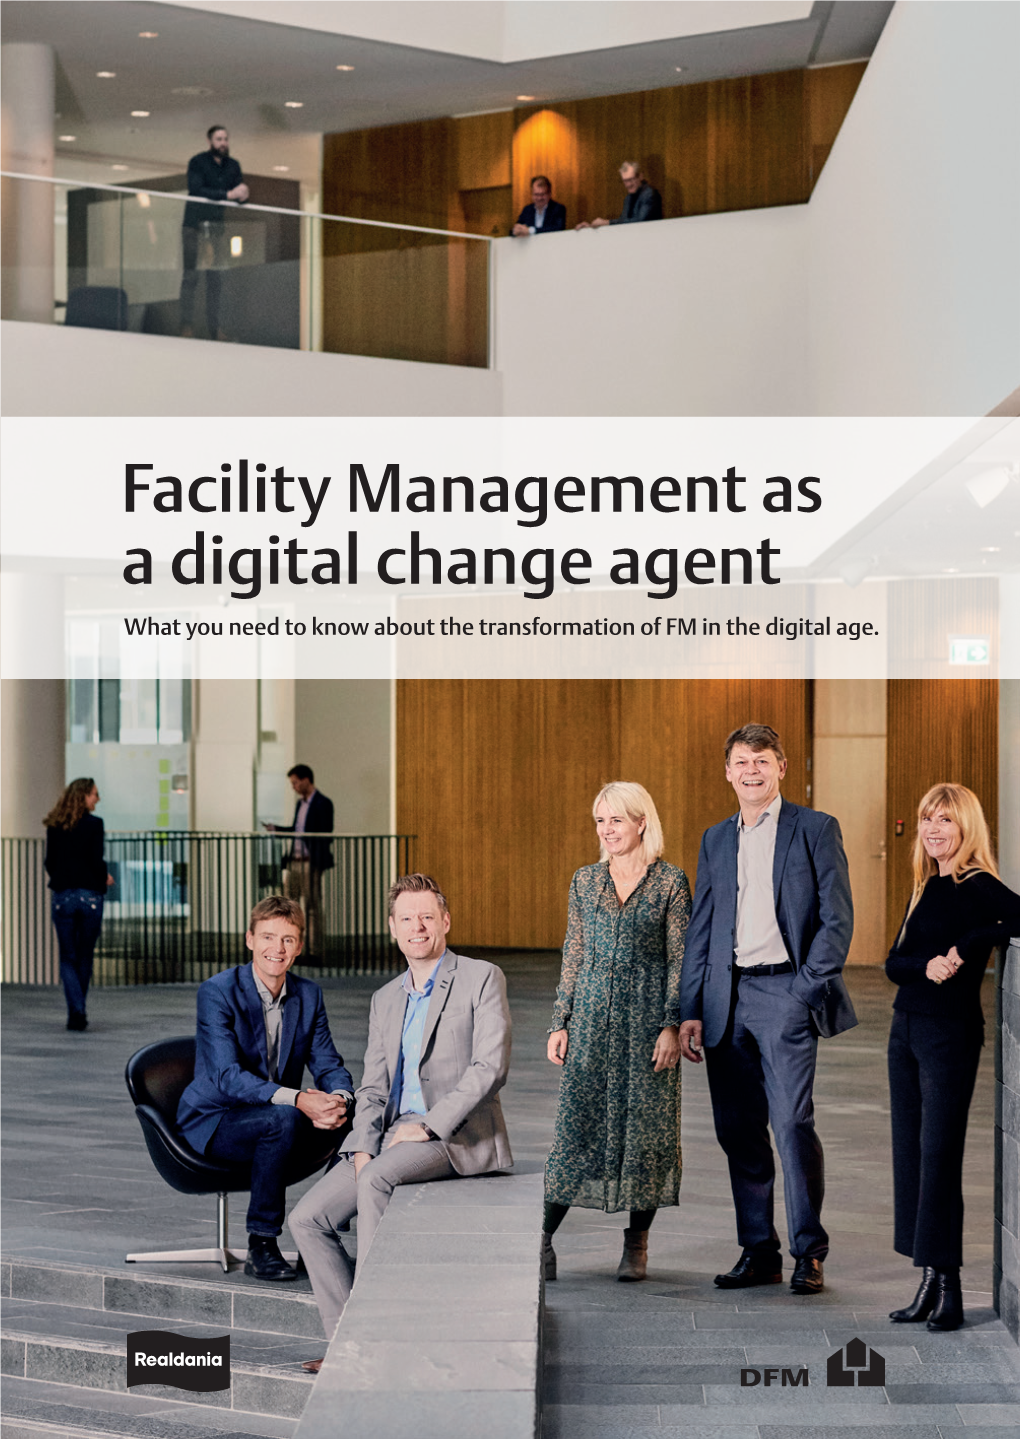 Facility Management As a Digital Change Agent What You Need to Know About the Transformation of FM in the Digital Age